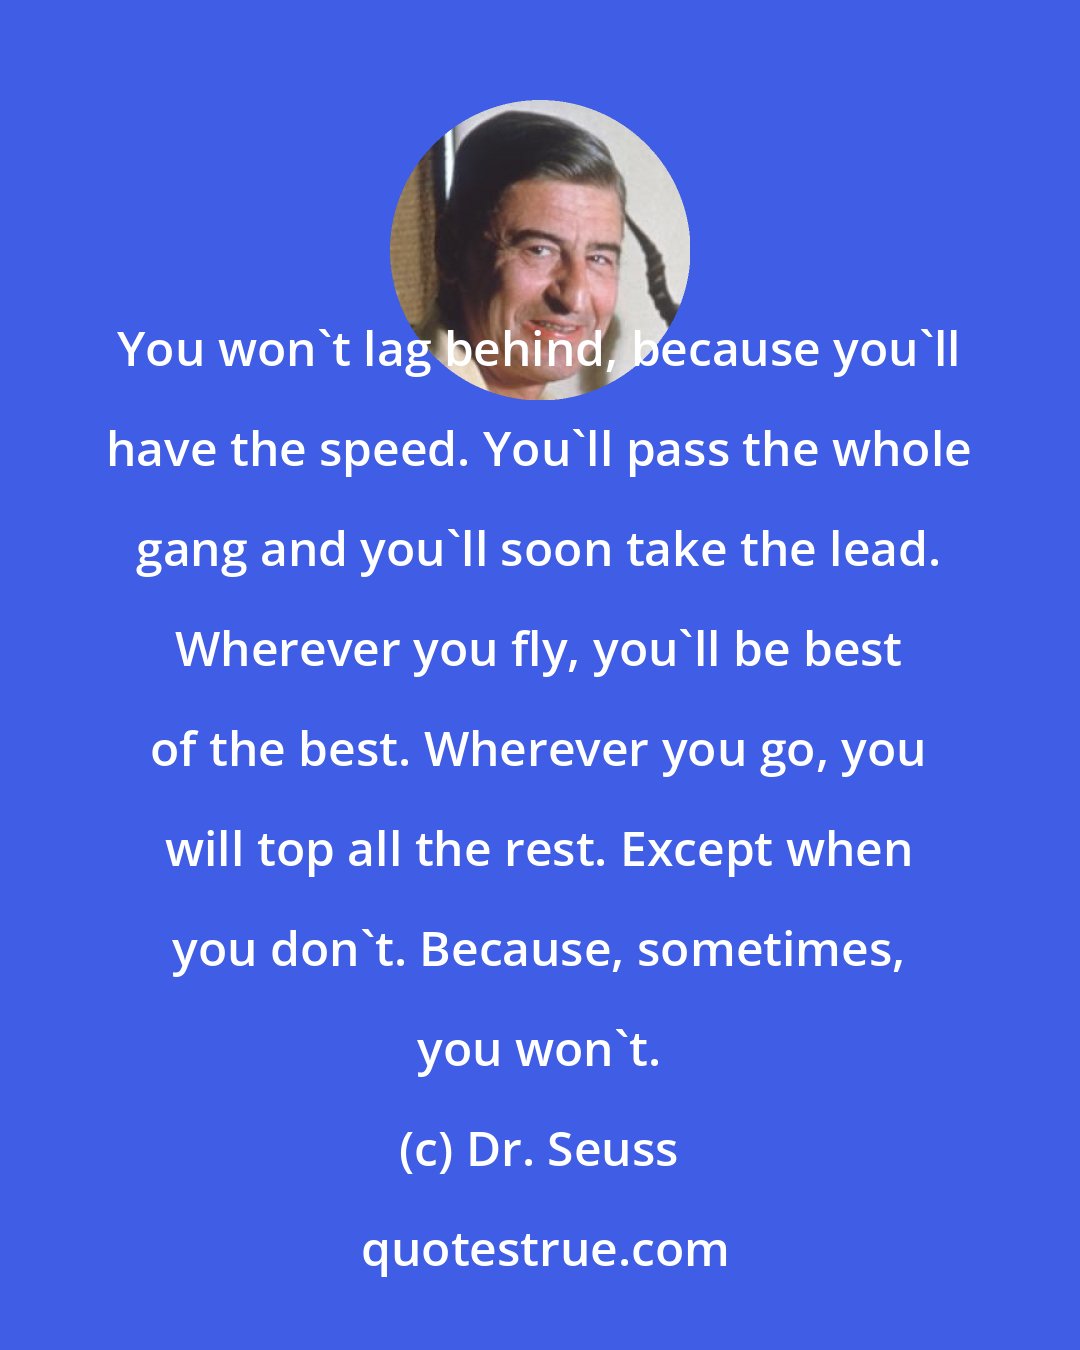 Dr. Seuss: You won't lag behind, because you'll have the speed. You'll pass the whole gang and you'll soon take the lead. Wherever you fly, you'll be best of the best. Wherever you go, you will top all the rest. Except when you don't. Because, sometimes, you won't.